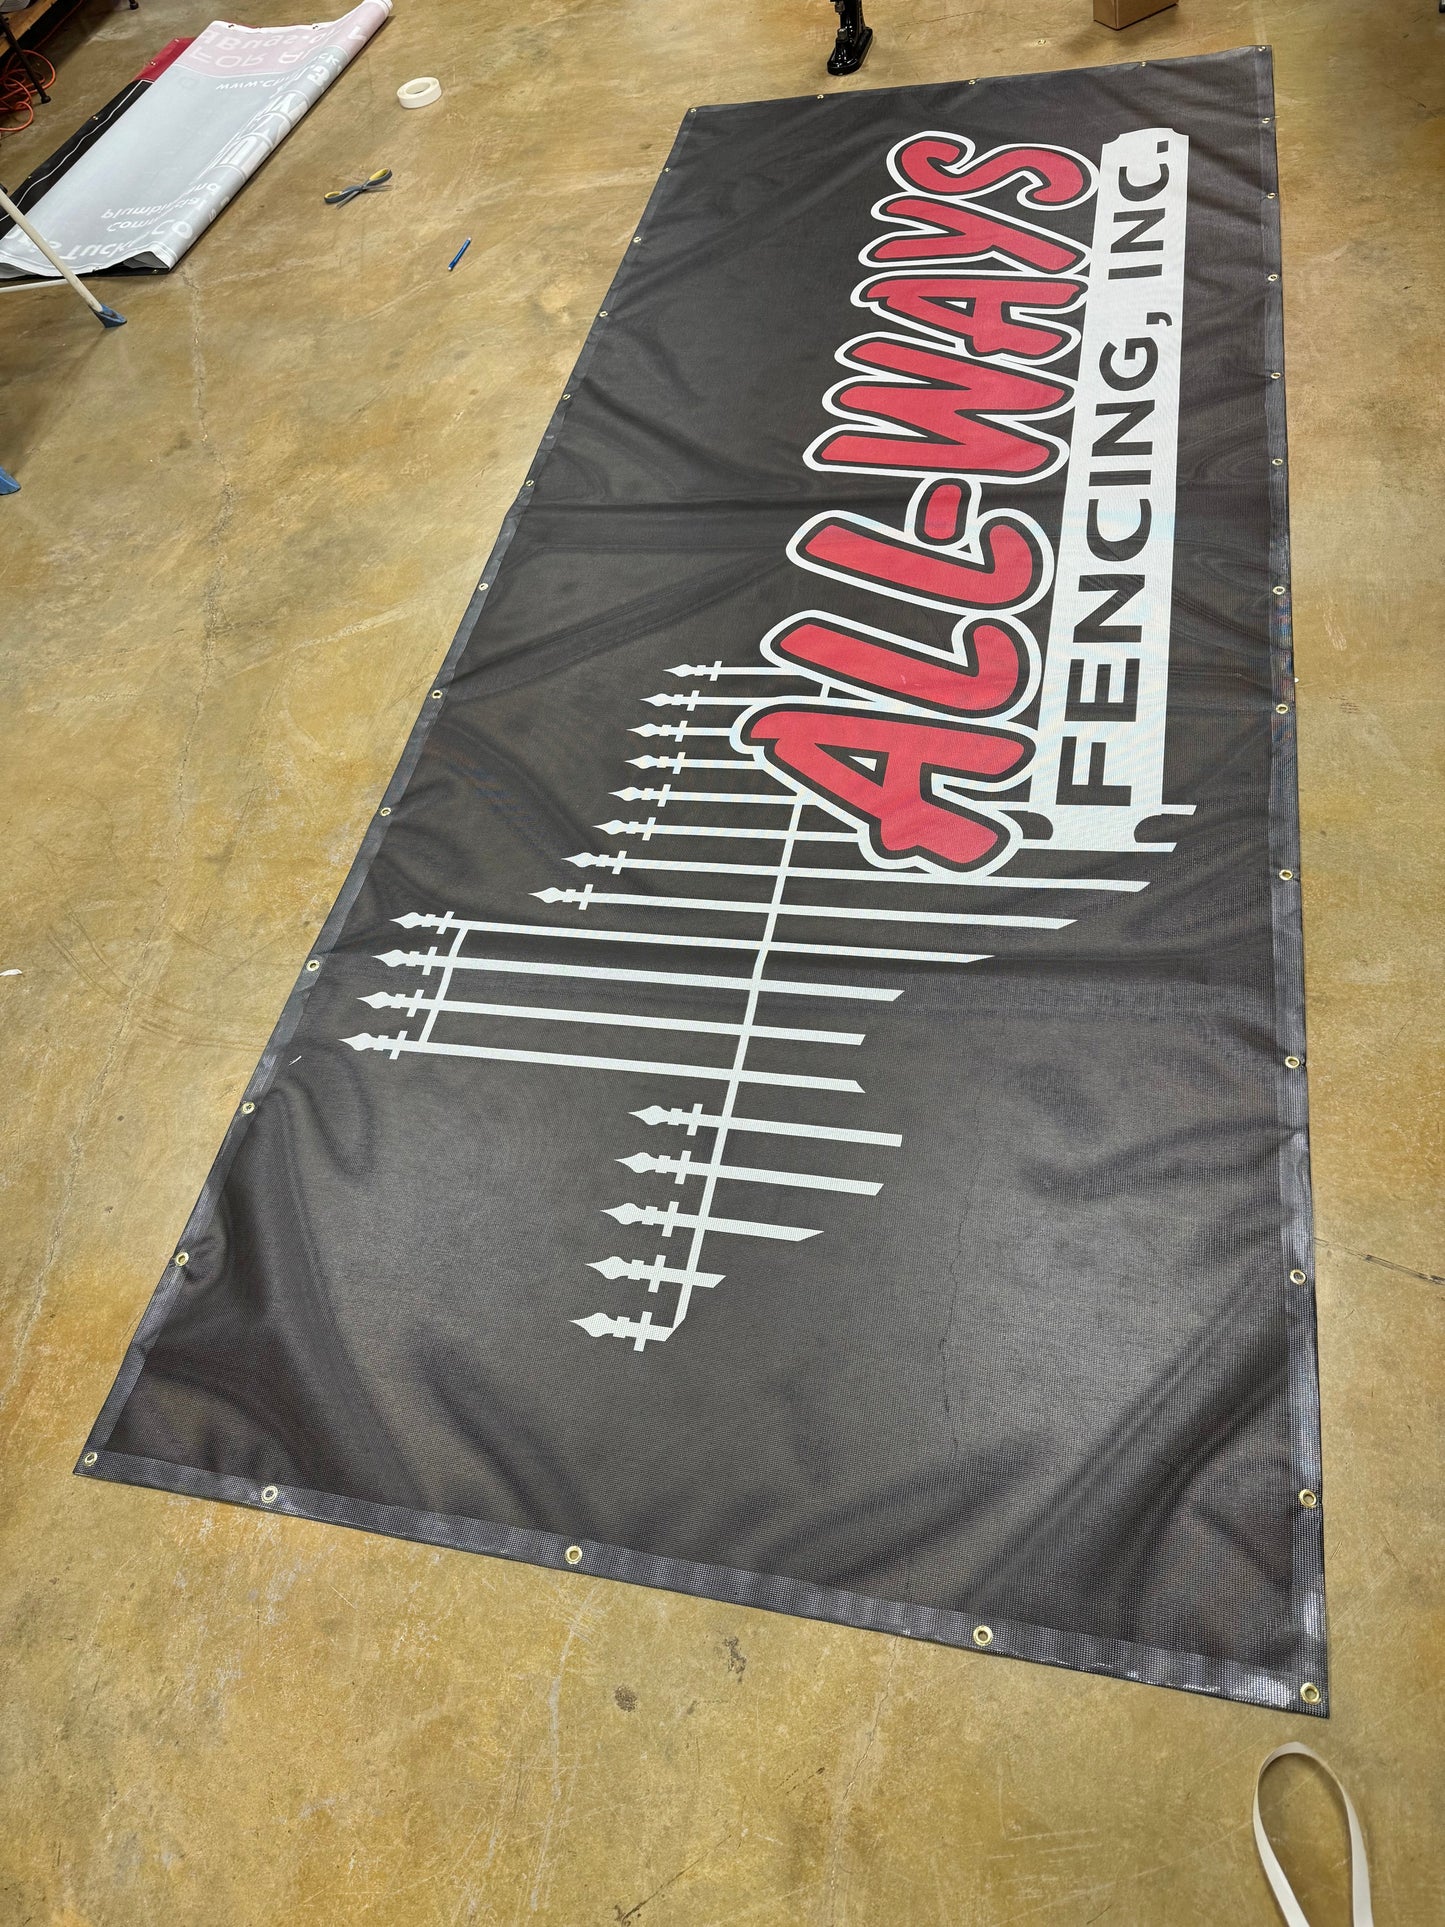 Personalize your vinyl banners with graphics using our online design tool, available with fast shipping for timely advertising.